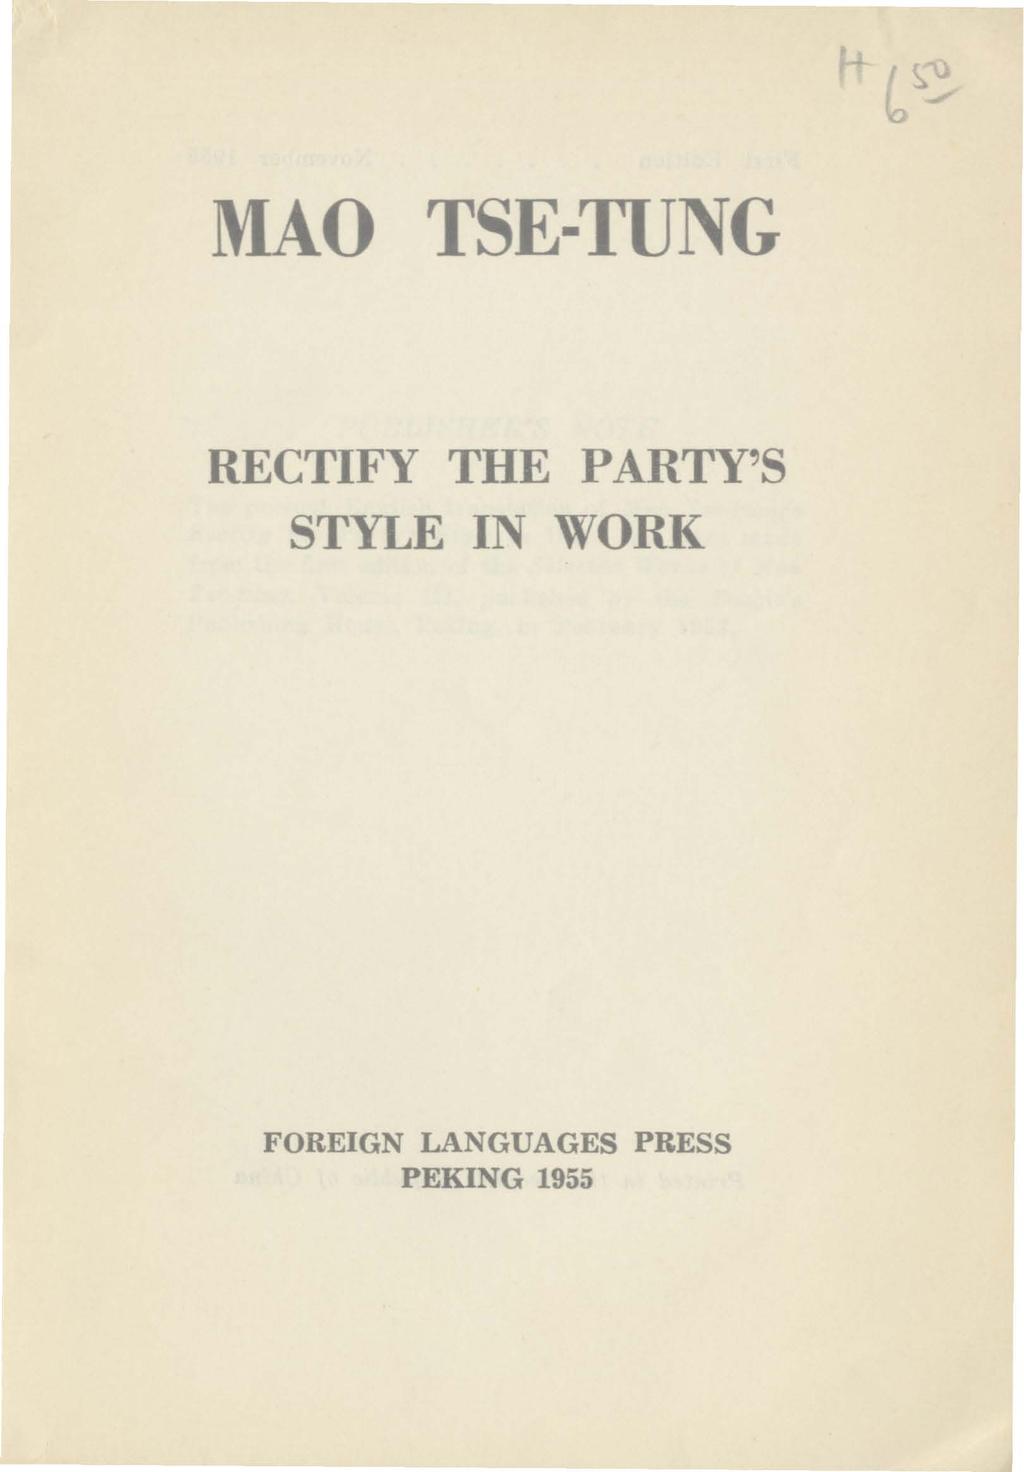 MAO TSE TUNG RECTIFY THE PARTY'S STYLE